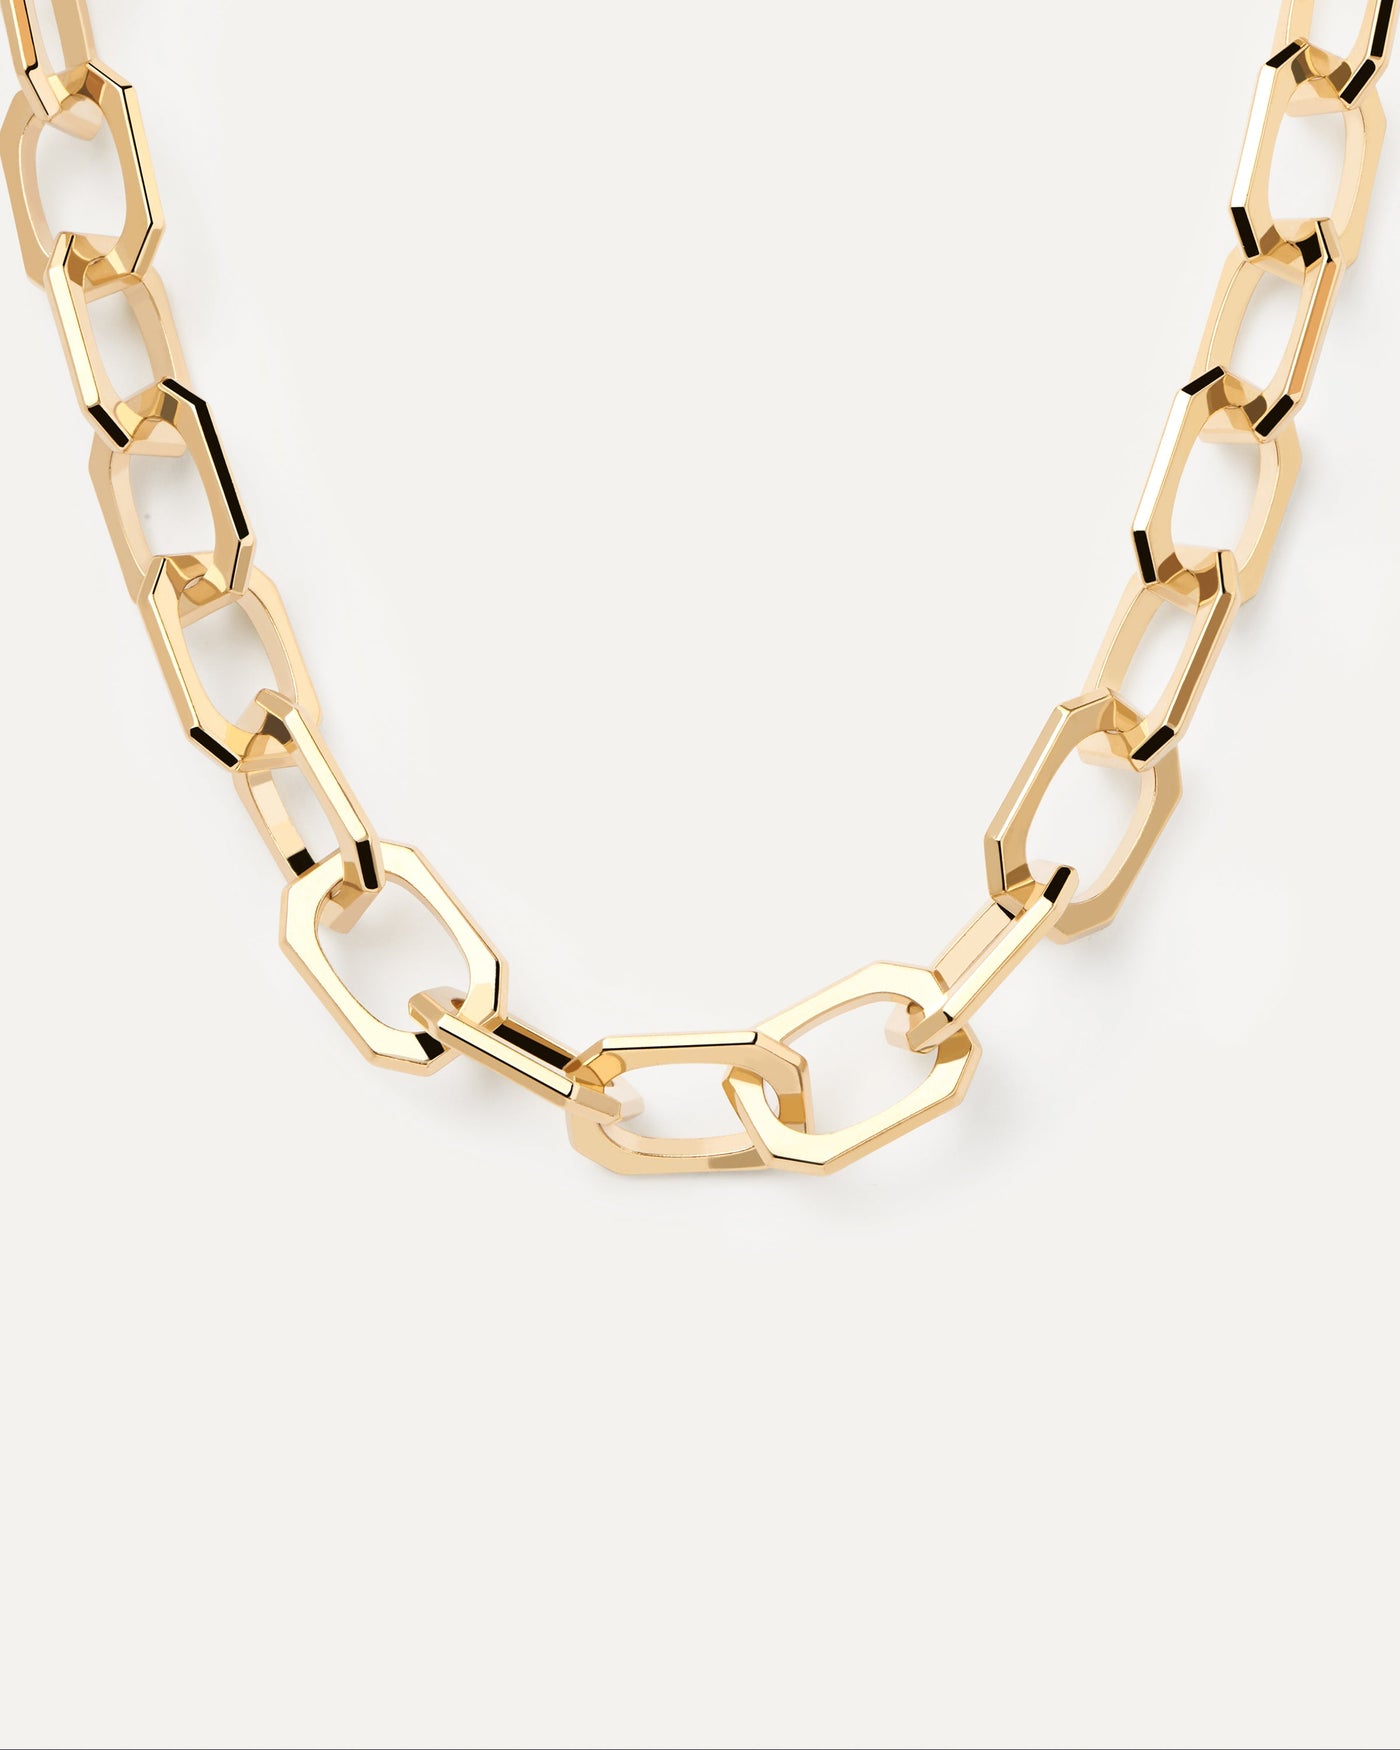 2023 Selection | Large Signature Chain Necklace. Cable chain necklace with big octogonal links in 18K gold plating. Get the latest arrival from PDPAOLA. Place your order safely and get this Best Seller. Free Shipping.